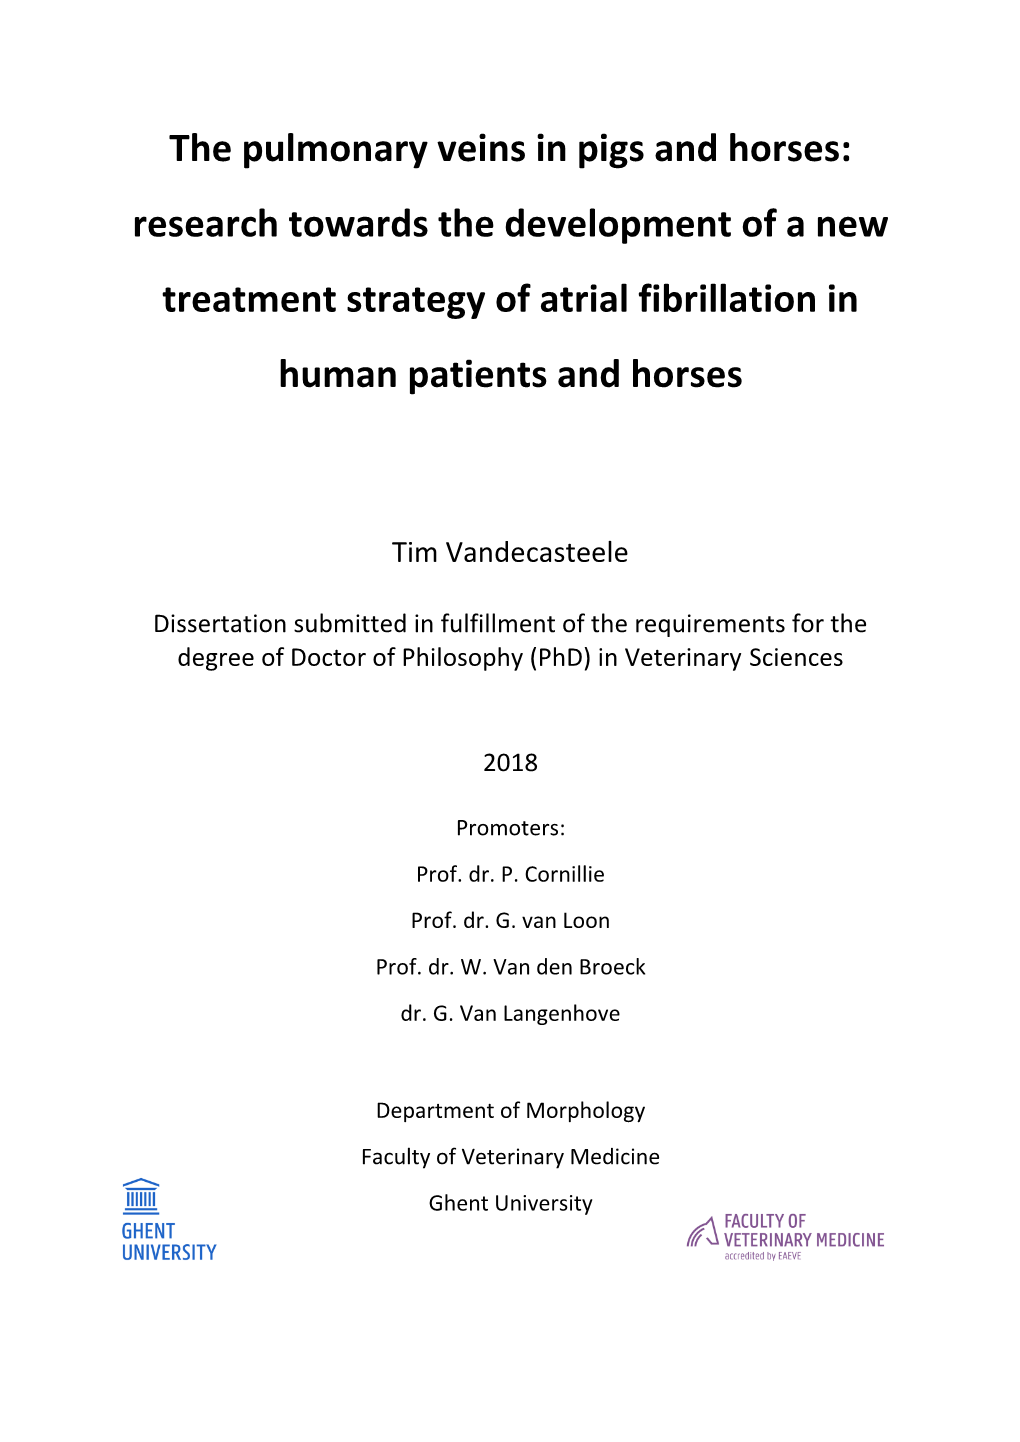 The Pulmonary Veins in Pigs and Horses: Research Towards the Development of a New Treatment Strategy of Atrial Fibrillation in Human Patients and Horses